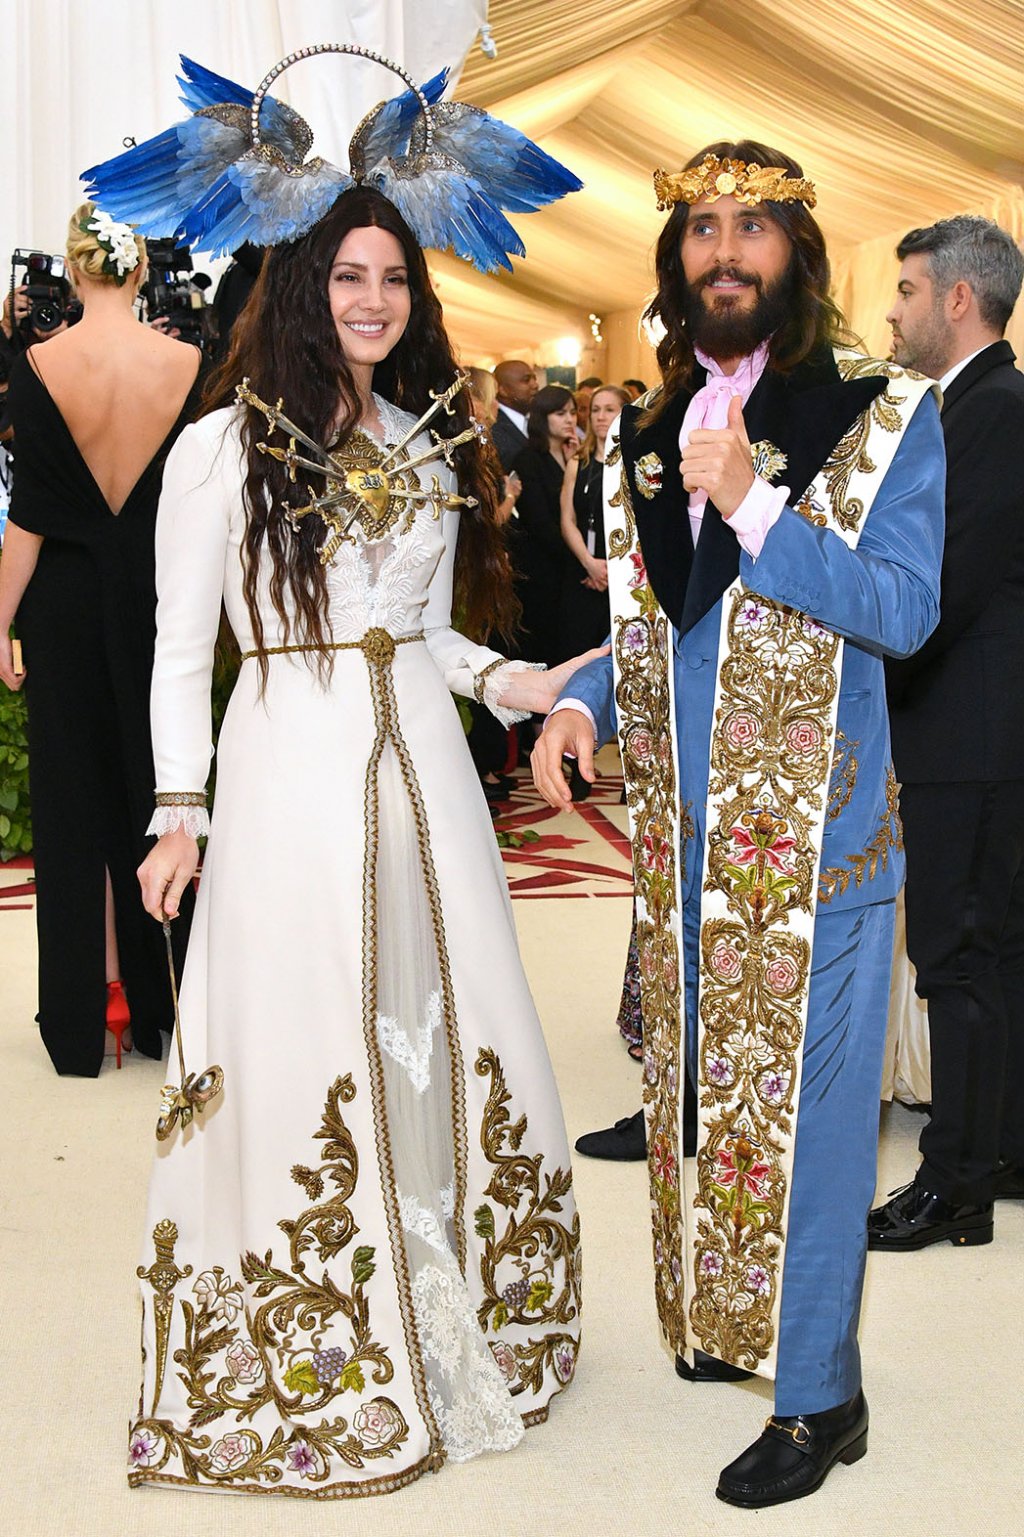 Lana Del Rey and Jared Leto in Gucci. Picture by Dia Dipasupil/WireImage